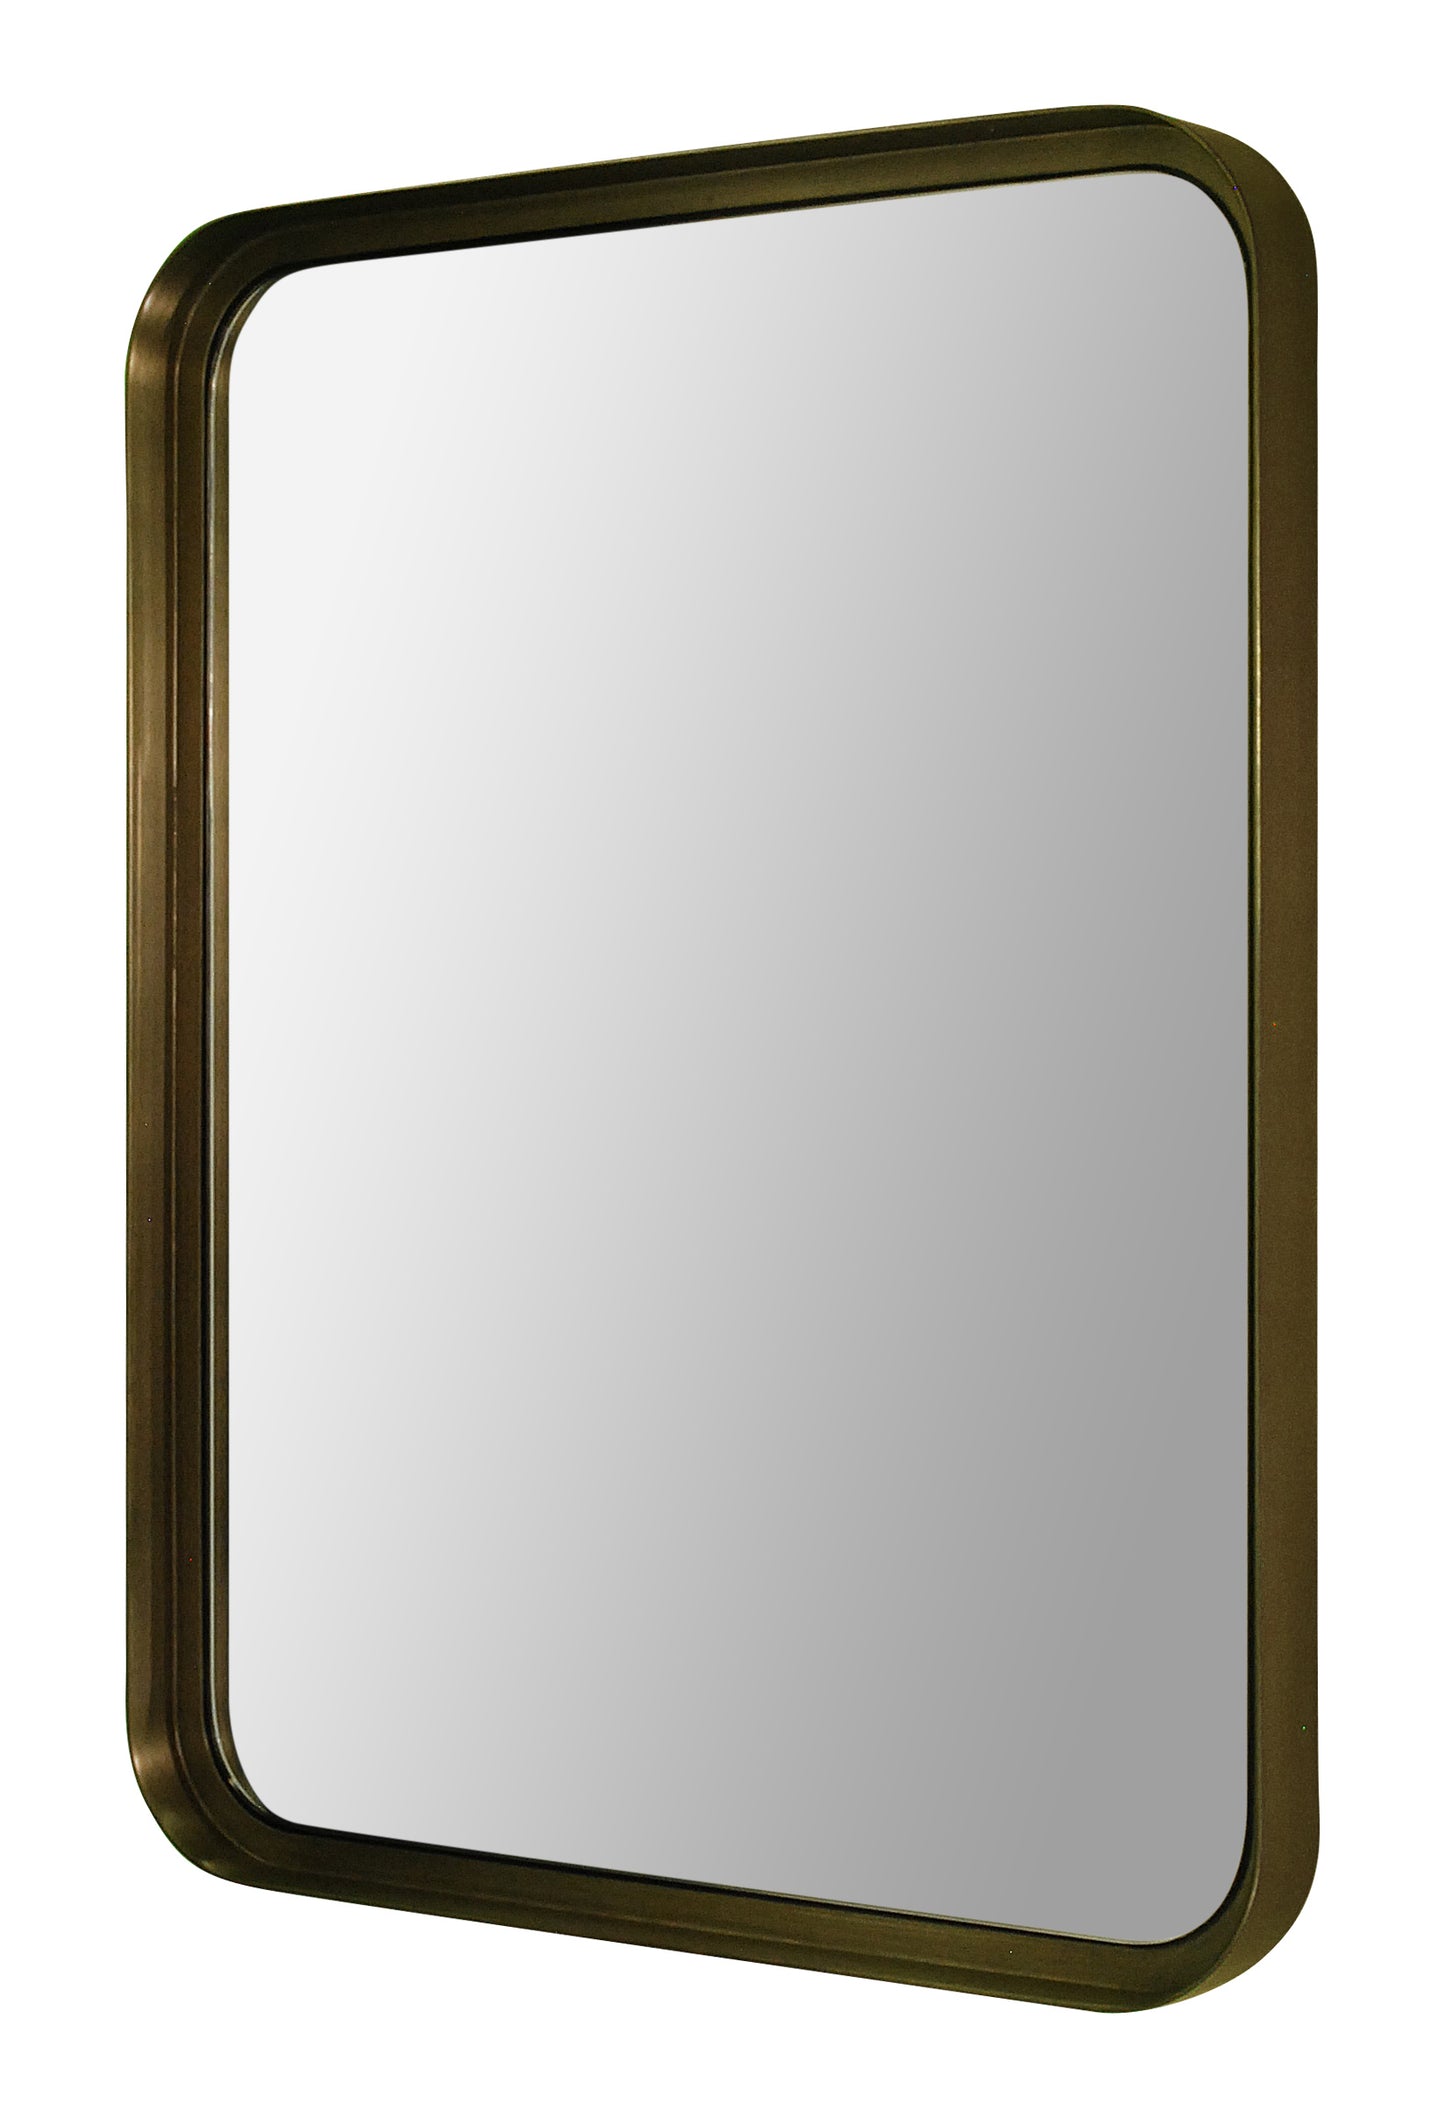 Mirror with curved corners